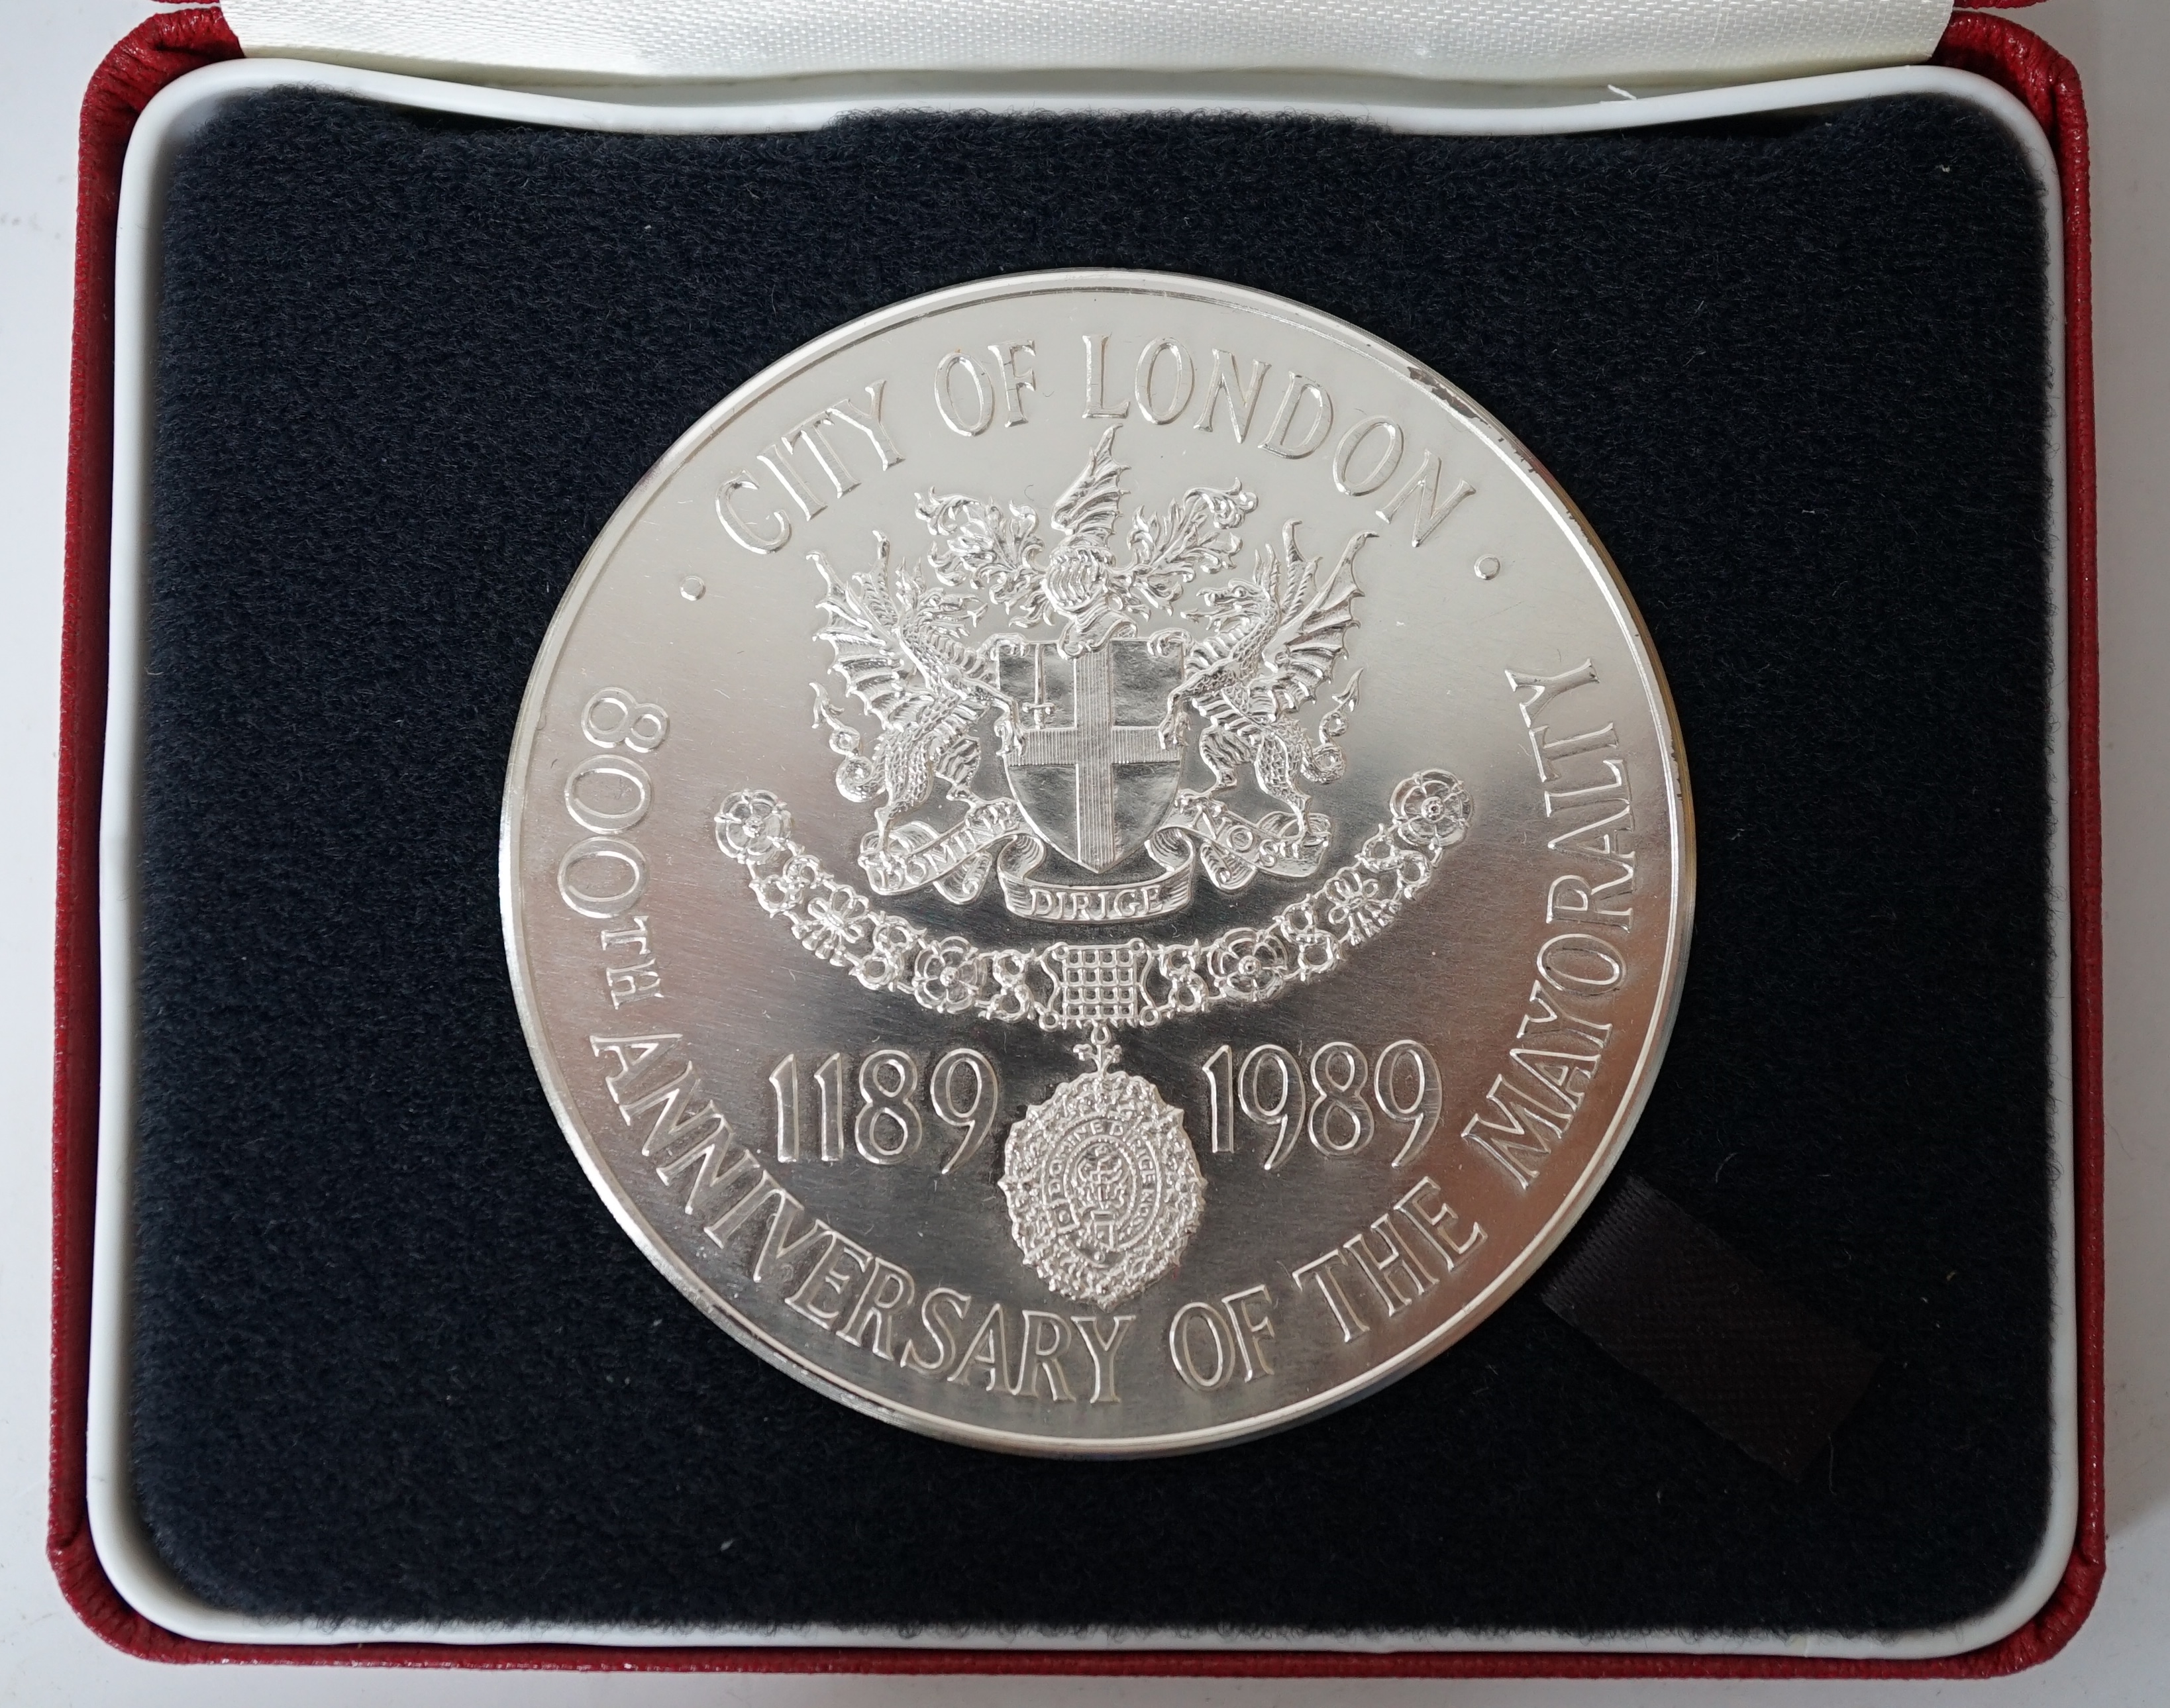 Royal Mint silver proof coins, UK; Elizabeth II - 1984 £1, 1989 £2, 1990 5p x 2 (one large, one small), 1980 Crown 80th Birthday of Queen Mother, 1989 Commemorative Medal 800 years of London Mayoralty, Asia; 1990 500 rup